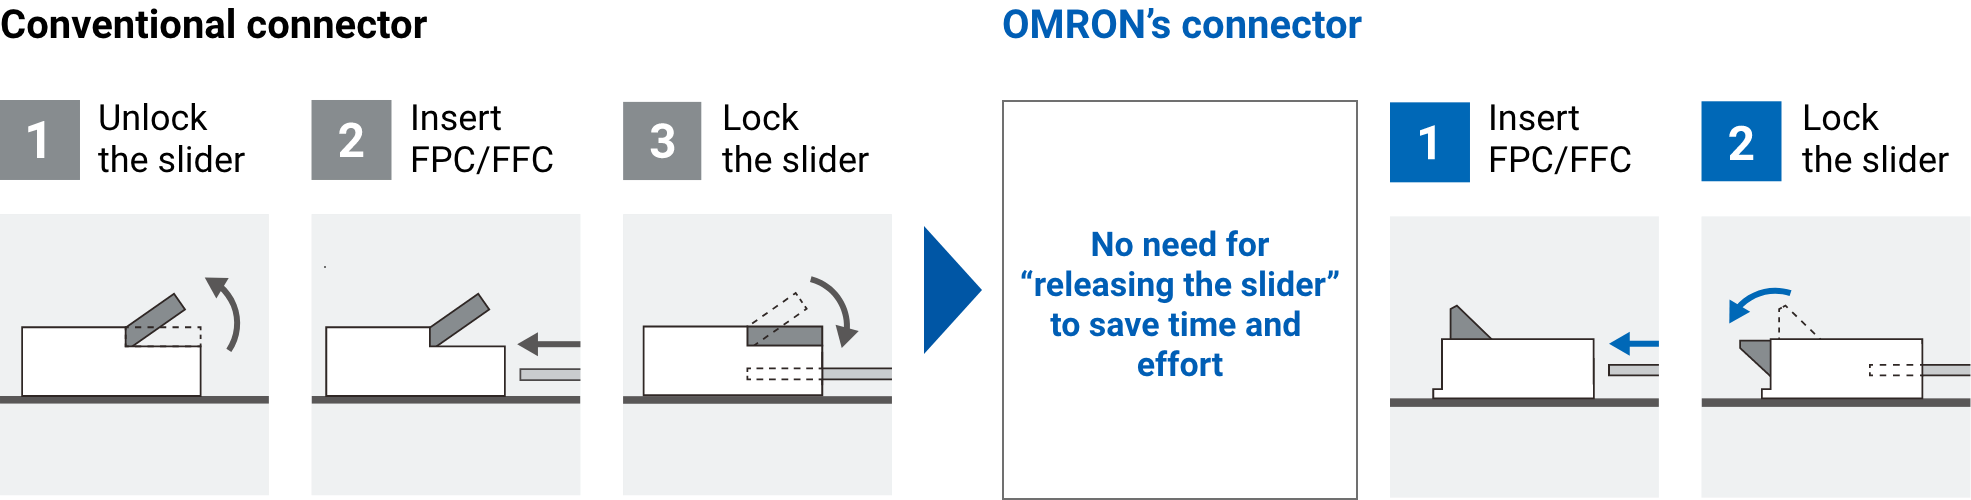 ［Conventional connector］1.Unlock the slider, 2.Insert FPC/FFC, 3.Lock the slider => ［OMRON's connector］No need for releasing the slider to save time and effort 1.Insert FPC/FFC, 2.Lock the slider